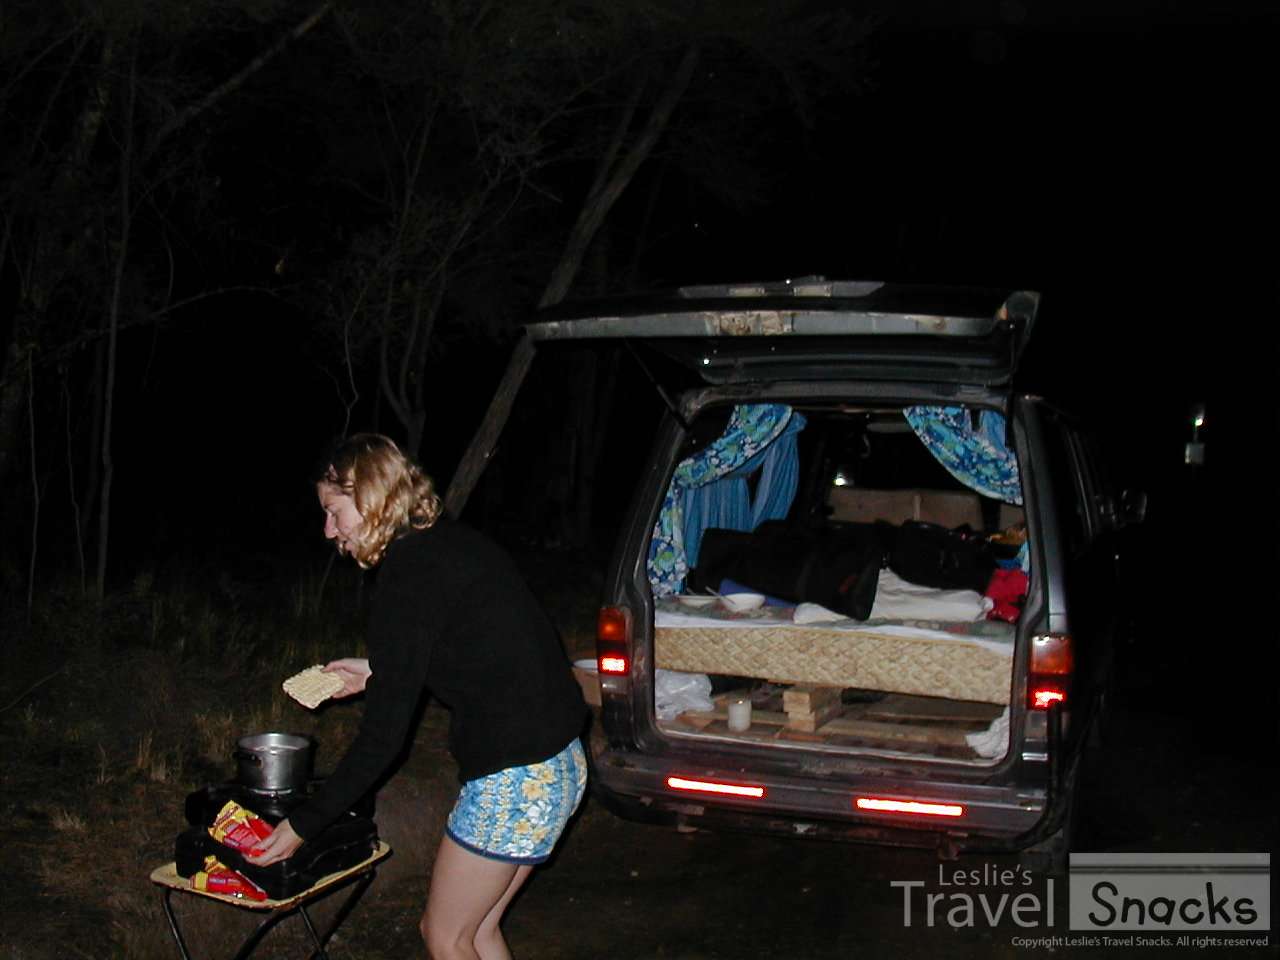 We had a full bed and cook top. Was hard learning to drive on the opposite side of the road!